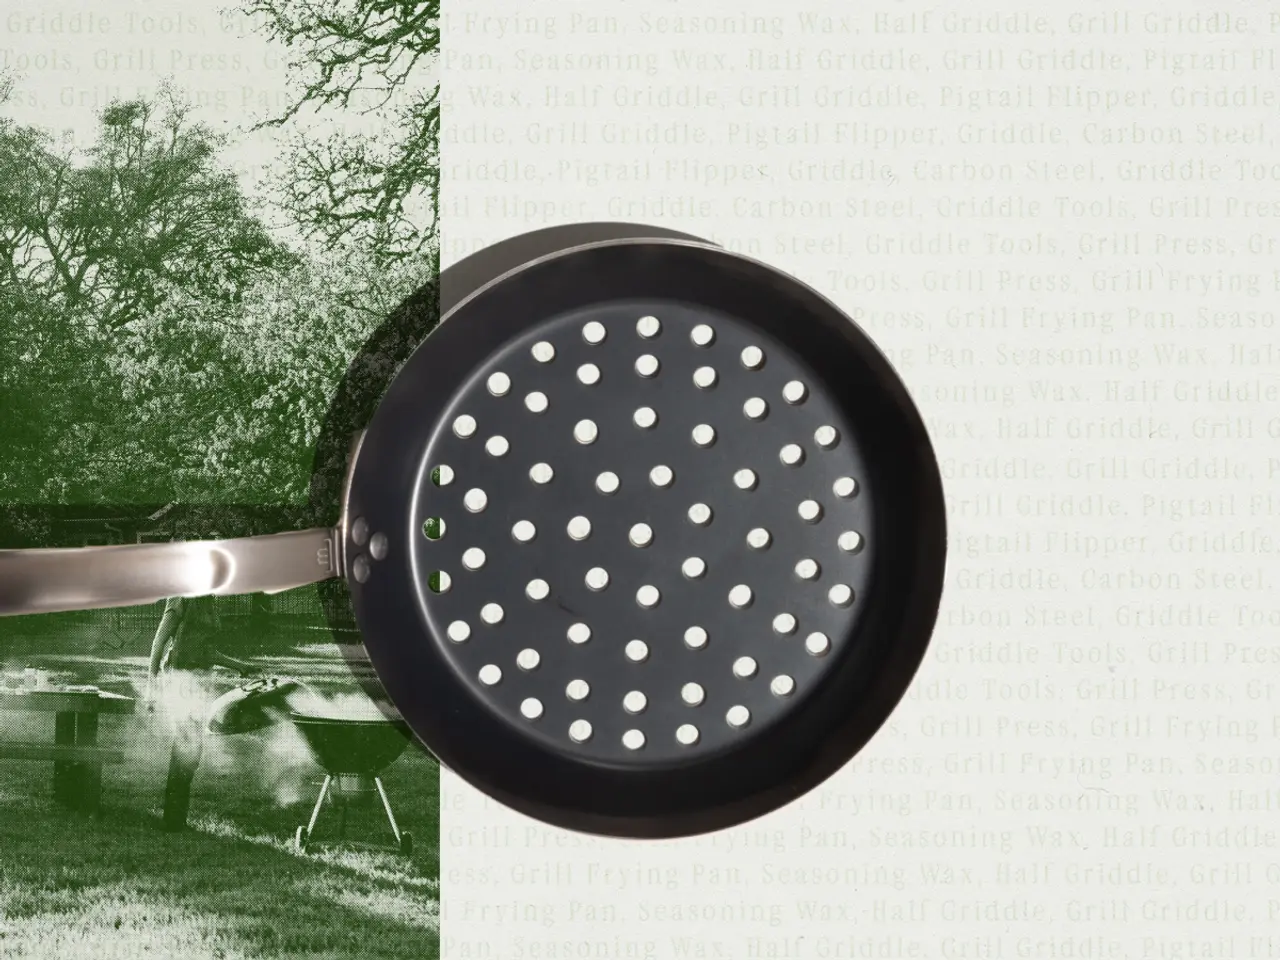 A black spatula with numerous round holes is superimposed over a faded background that combines nature and text elements.